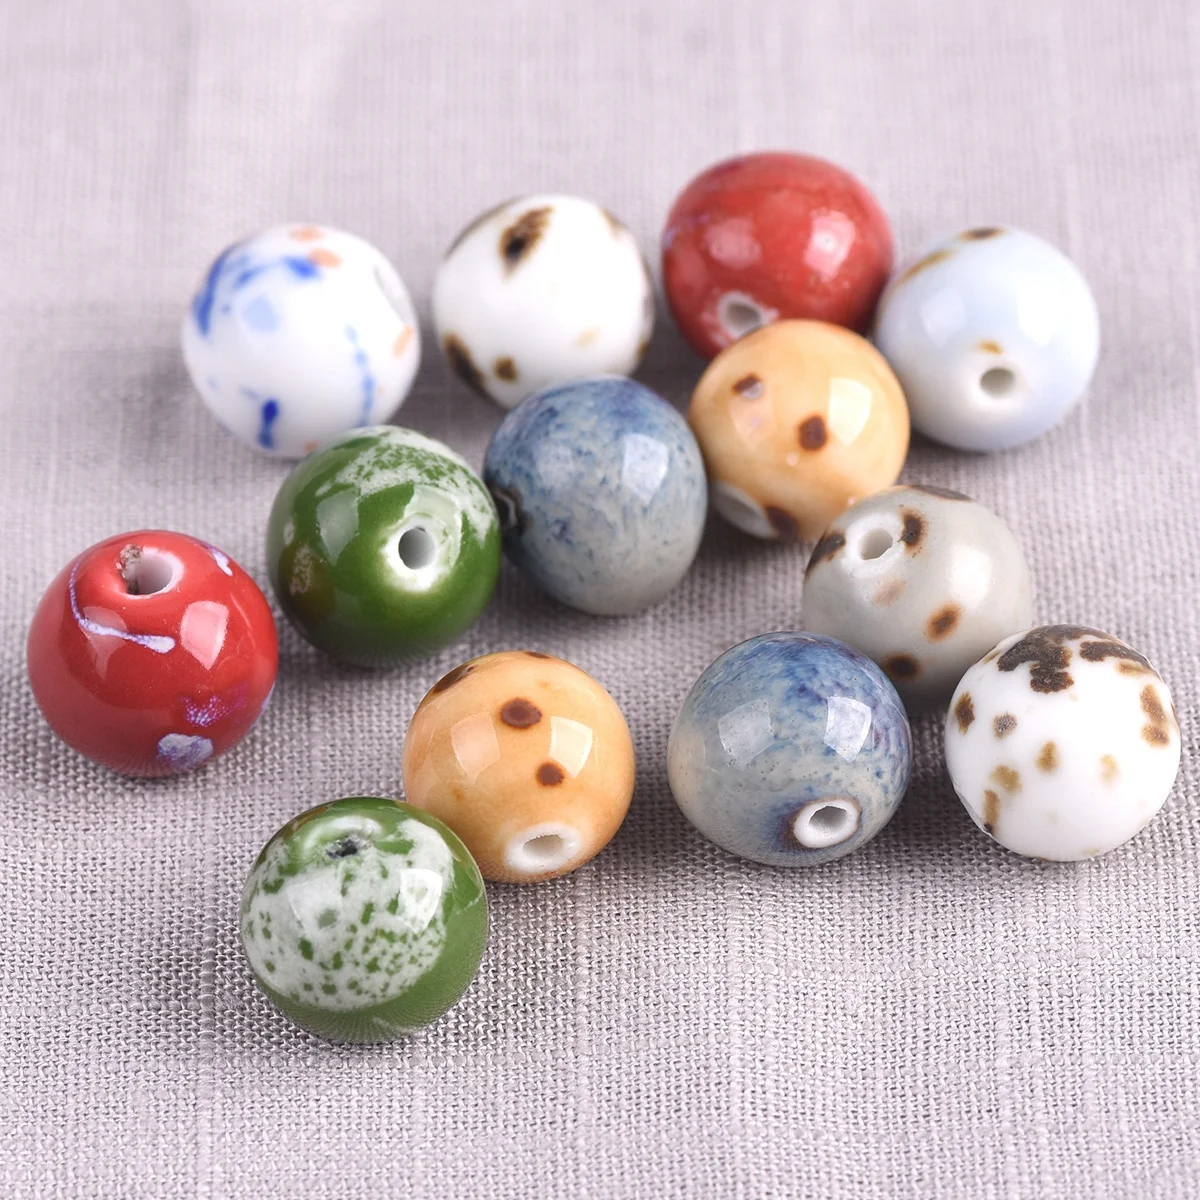 2pcs strawberry 11mm 15mm handmade ceramic porcelain pendants for jewelry making diy earring findings 10pcs 14~15mm Random Mixed Round Ceramic Porcelain Handmade Loose Spacer Beads lot for DIY Crafts Jewelry Making